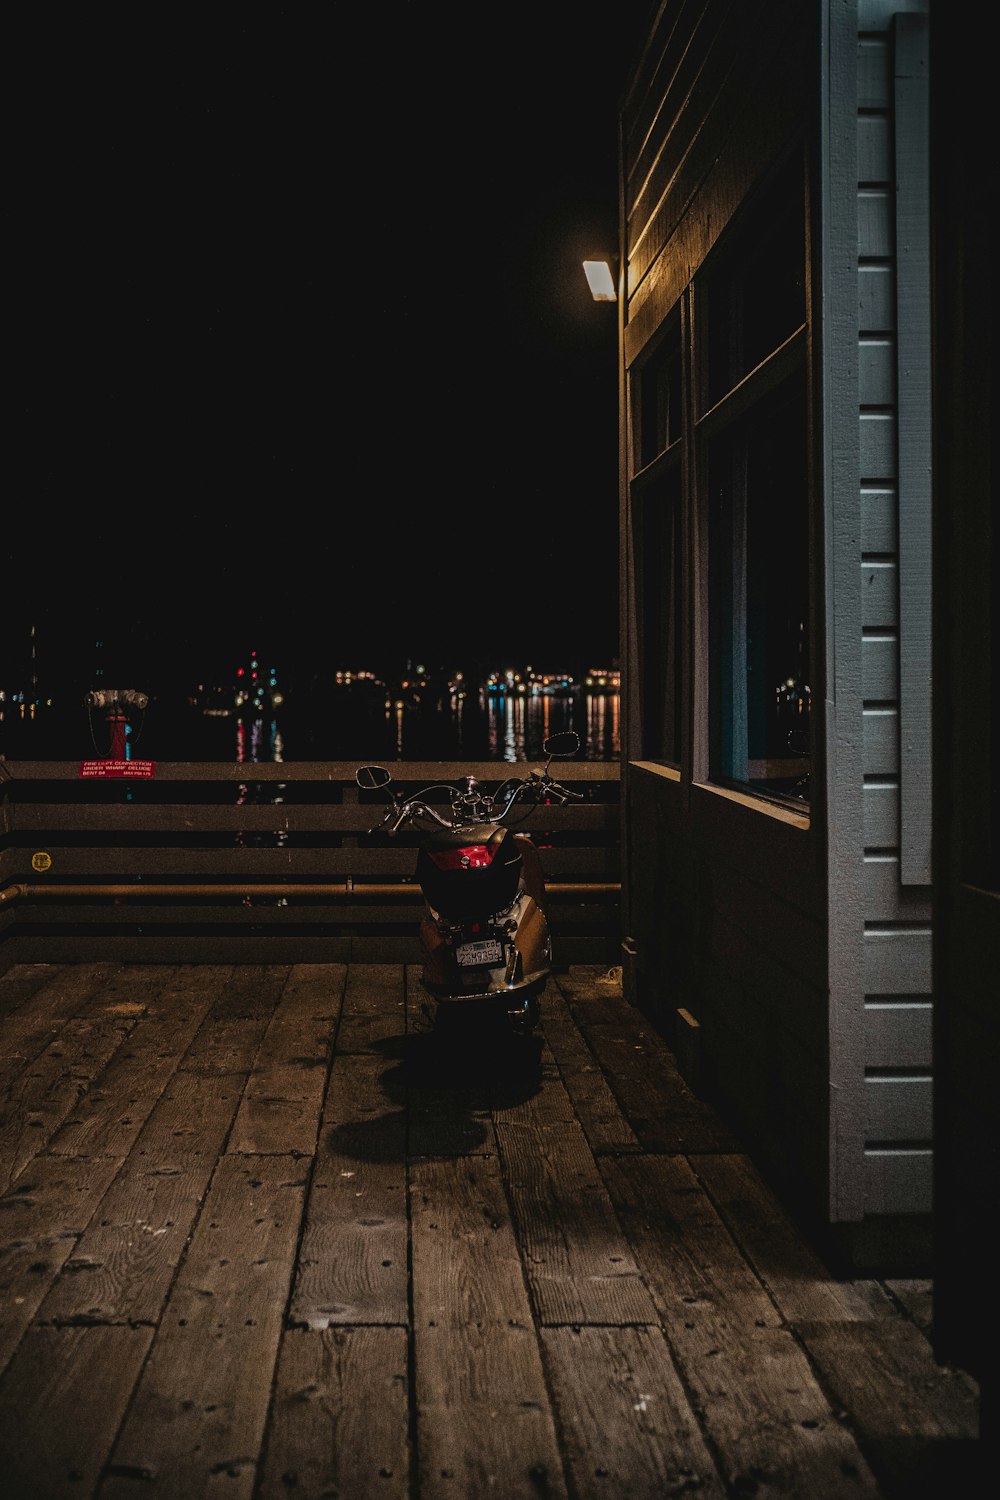 a motorcycle parked on a wooden deck at night